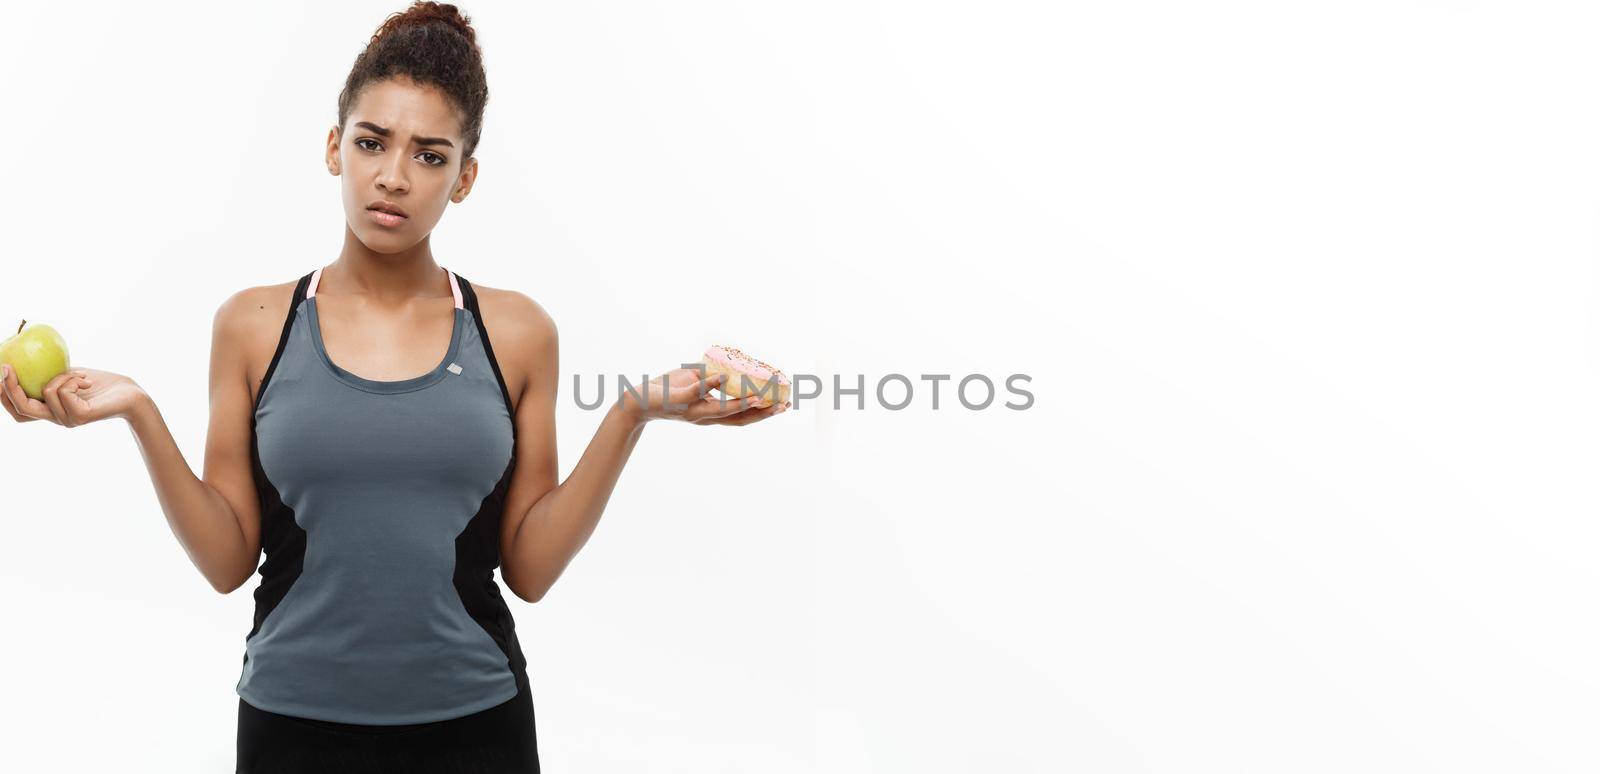 Healthy and diet concept - Beautiful sporty African American make a decision between donut and green apple. Isolated on white background